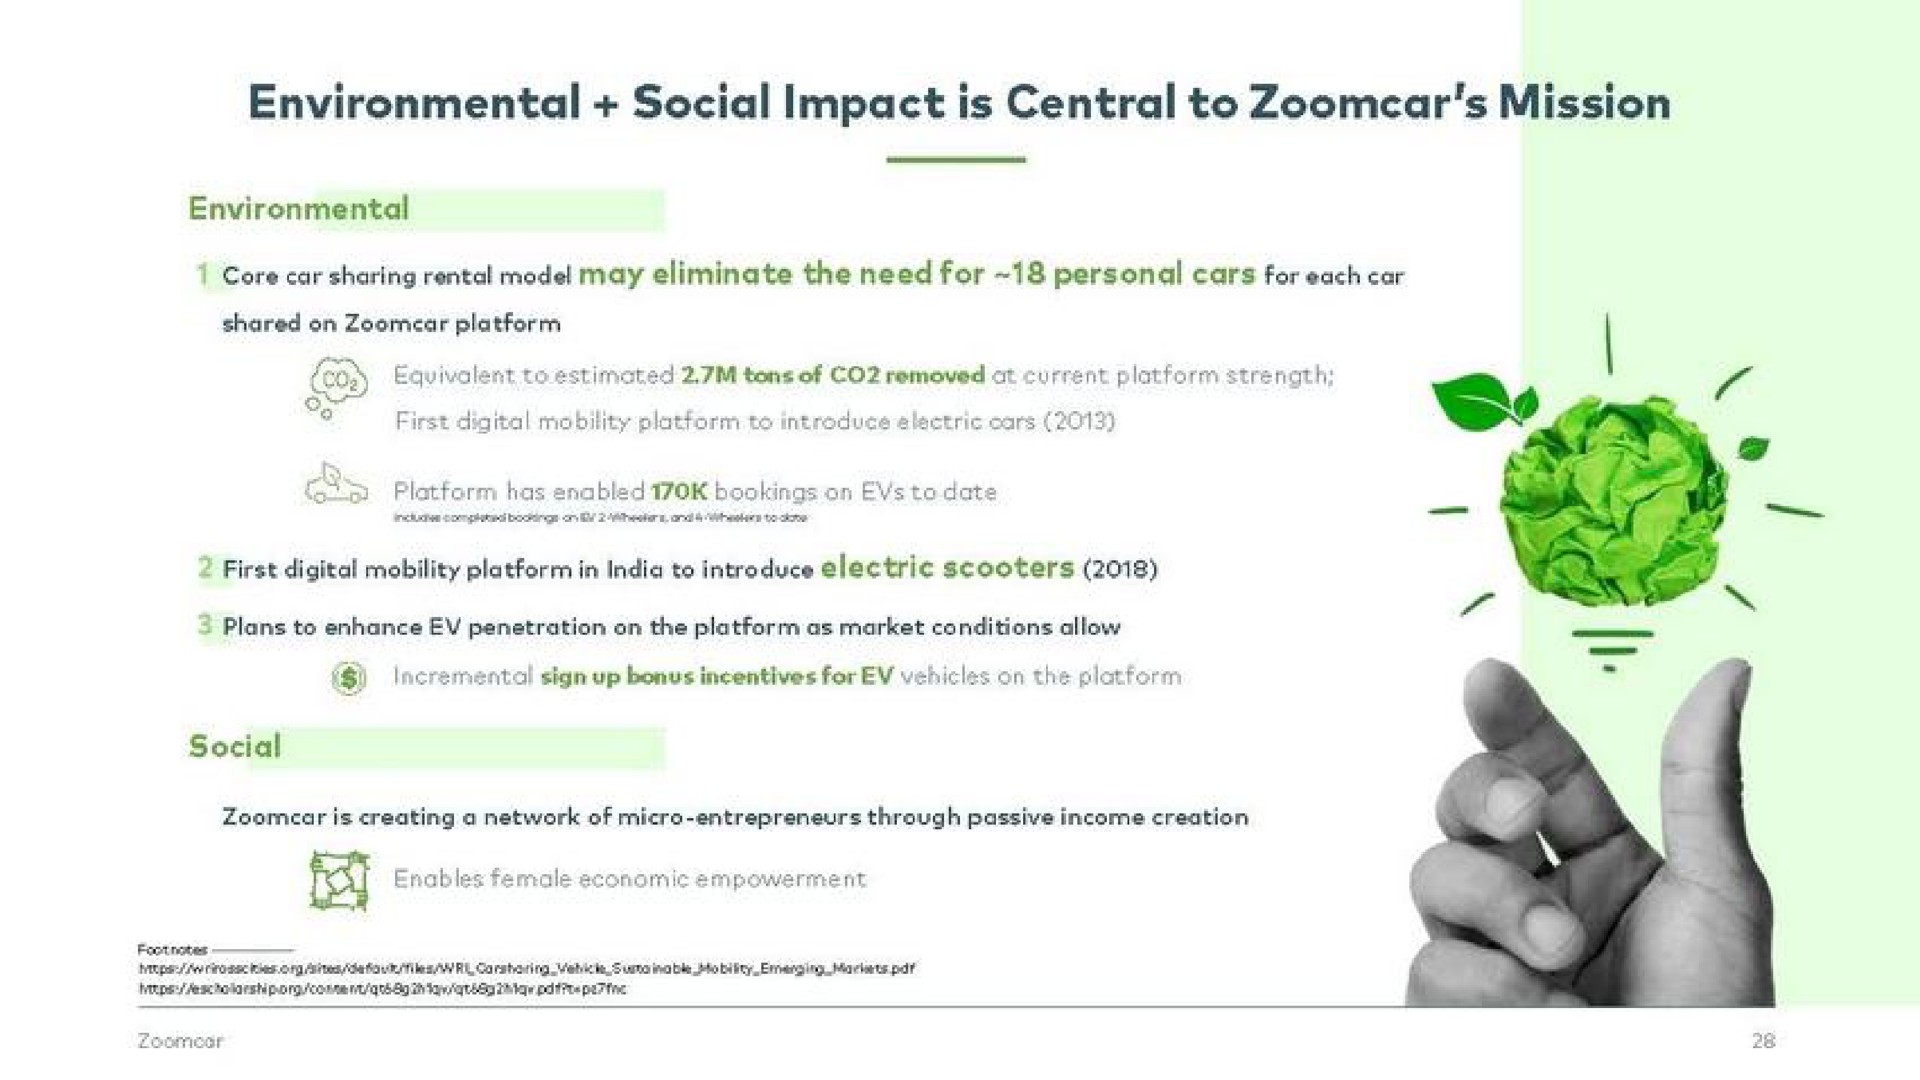 environmental social impact is central to mission | Zoomcar